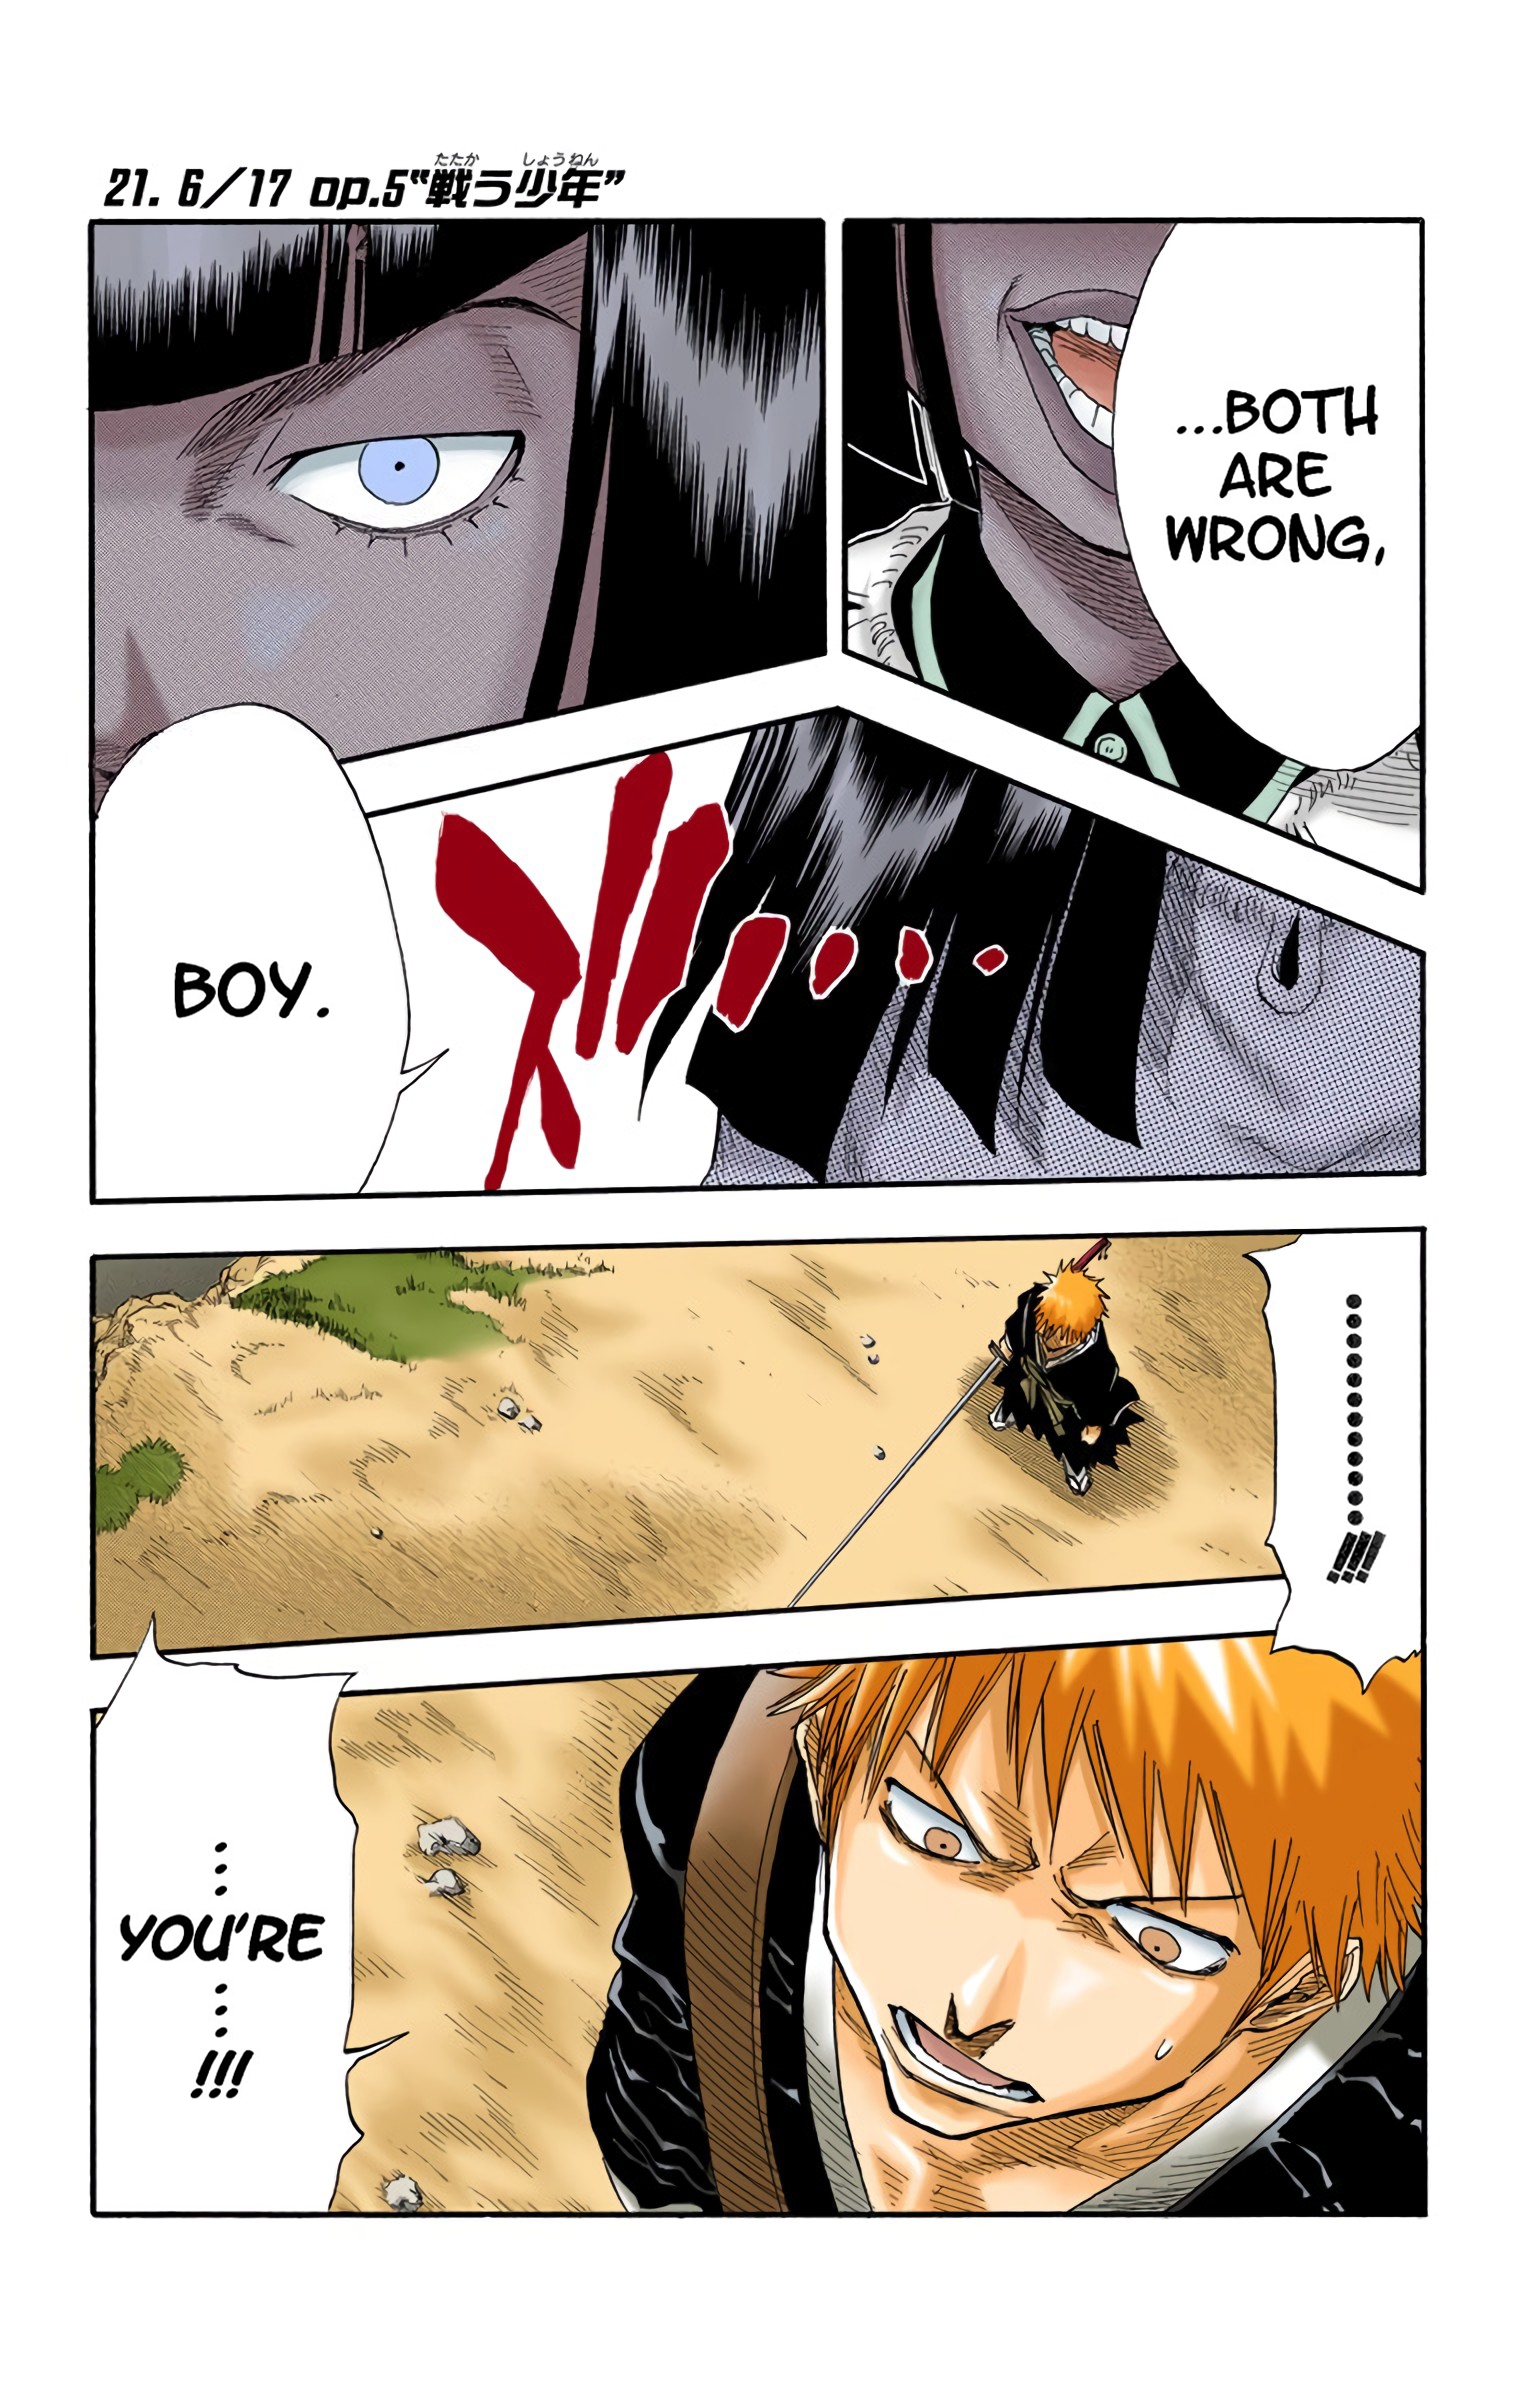 Bleach - Digital Colored Comics Vol.3 Chapter 21: 6/17 Op. 5 A Fighting Boy - Picture 1